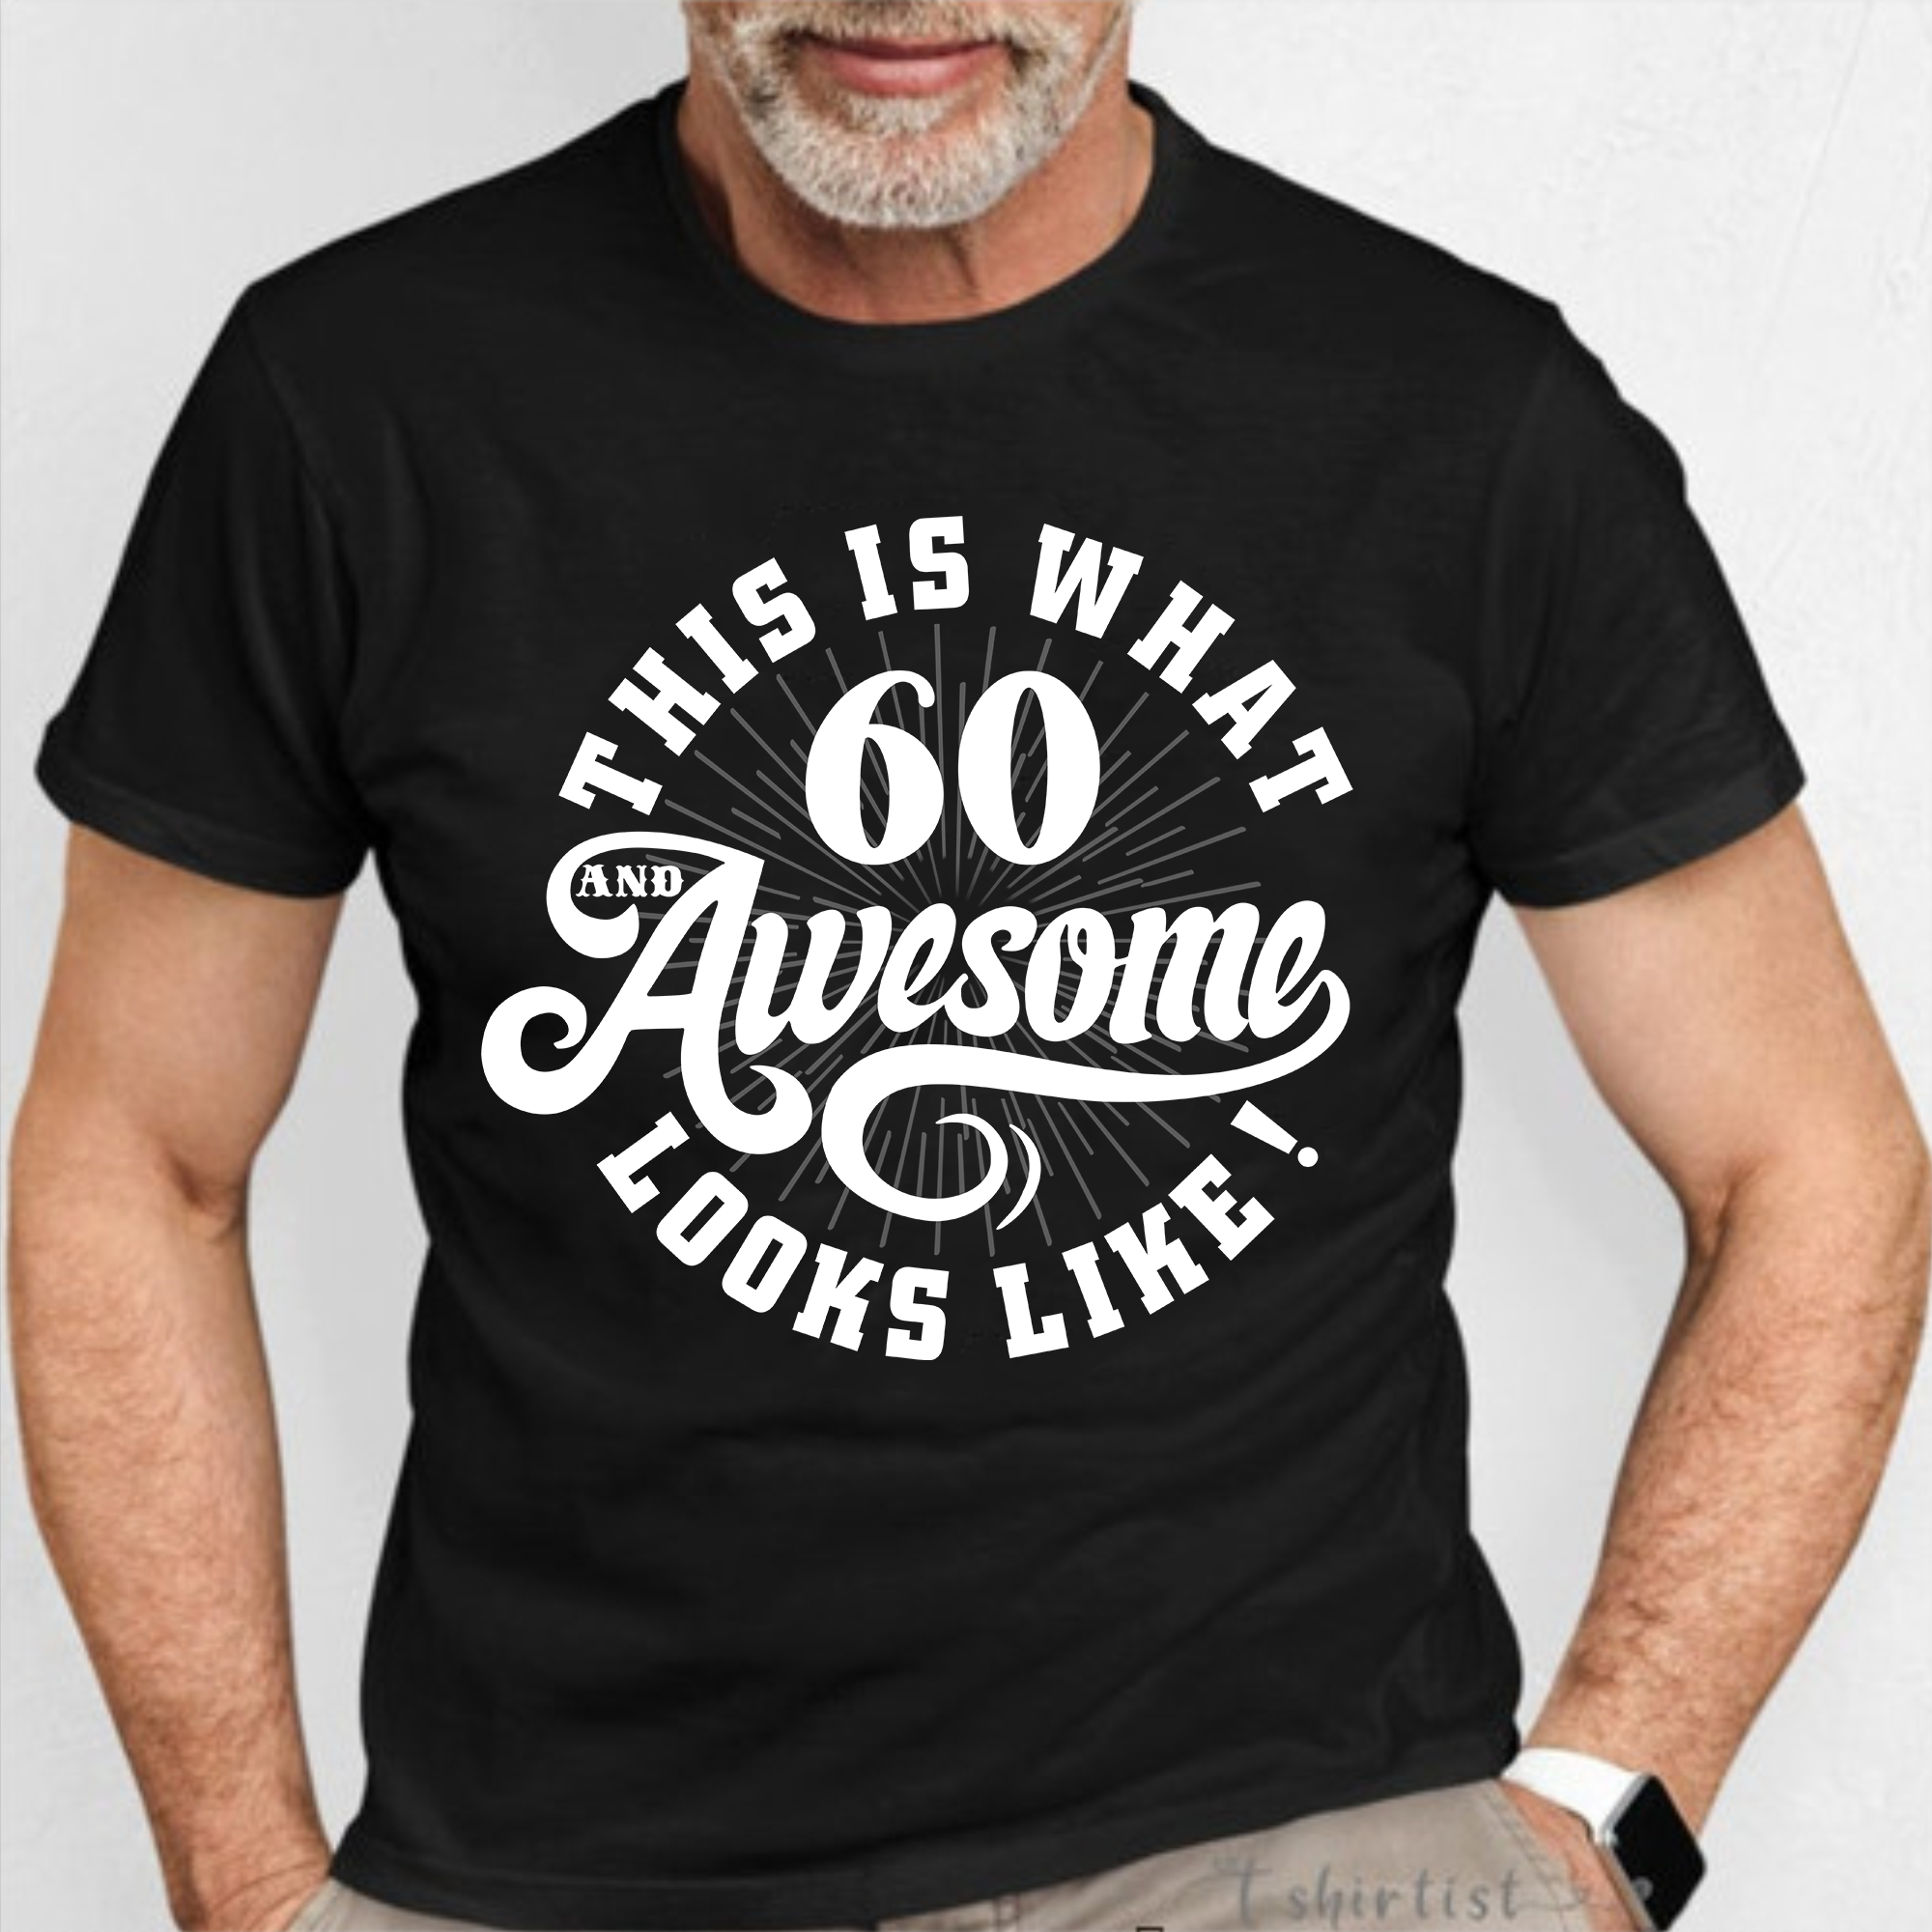 This Is What 60 Awesome Looks Like – Happy 60th Birthday Shirt